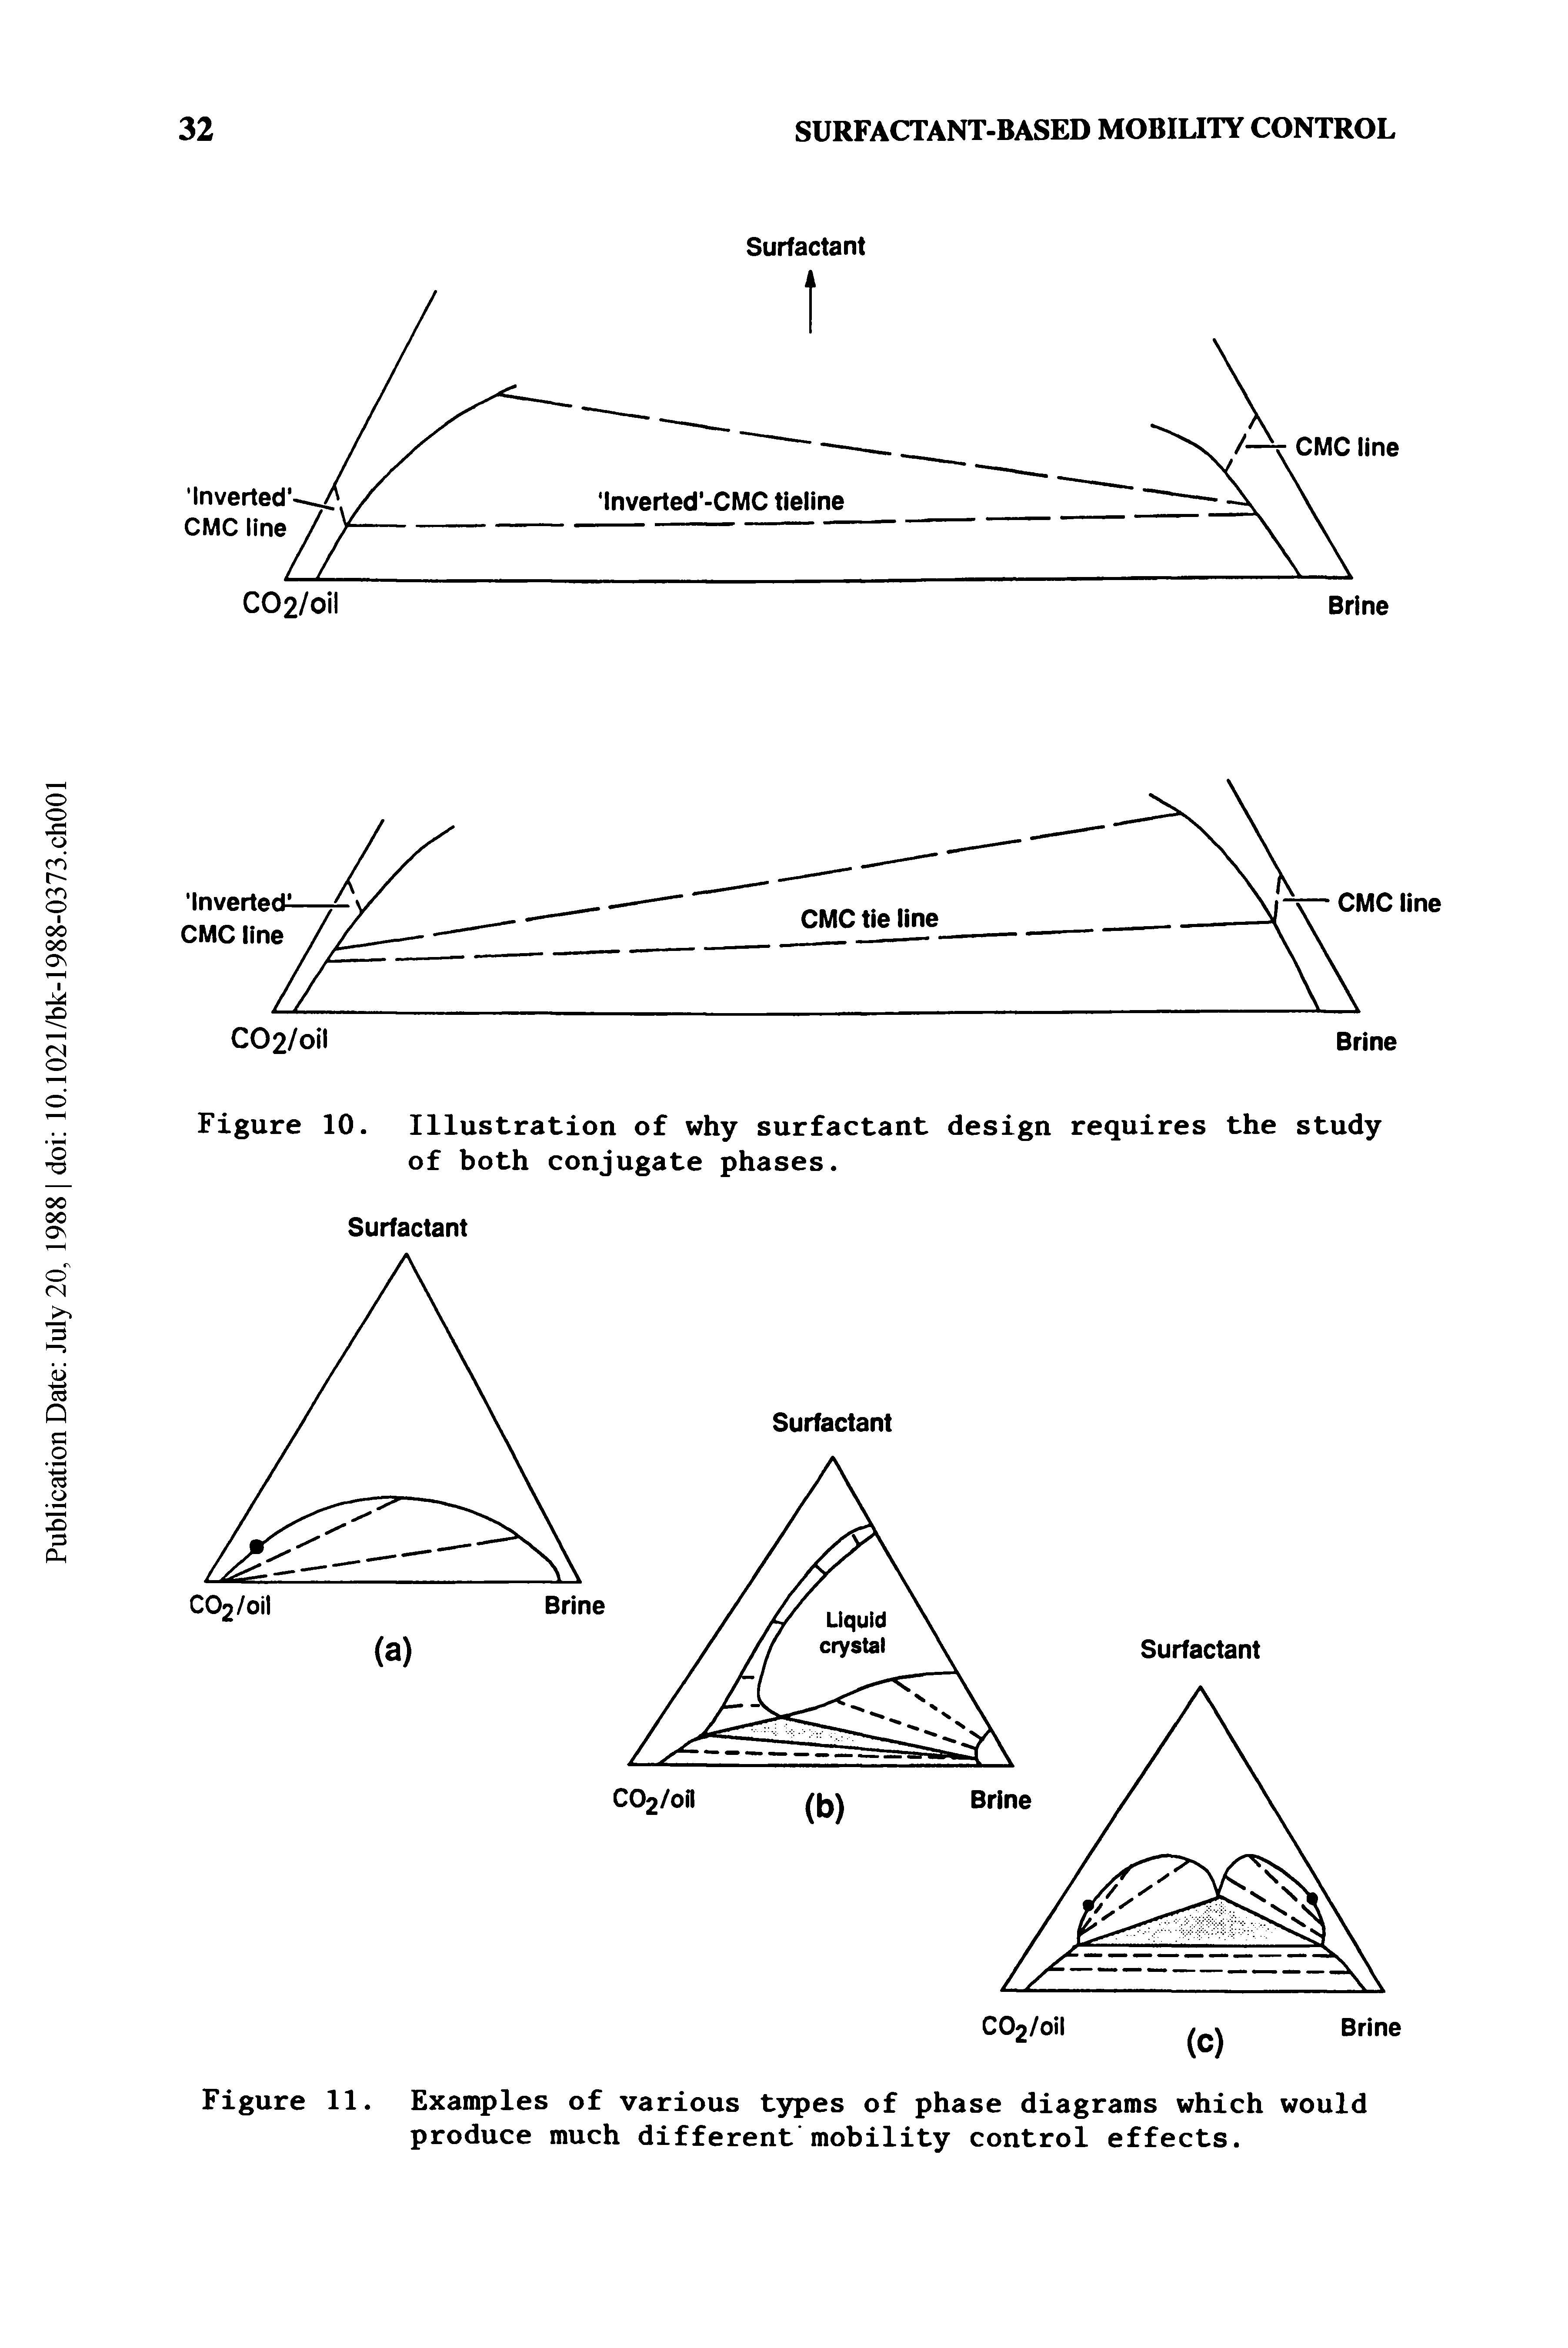 Figure 11. Examples of various types of phase diagrams which would produce much different mobility control effects.